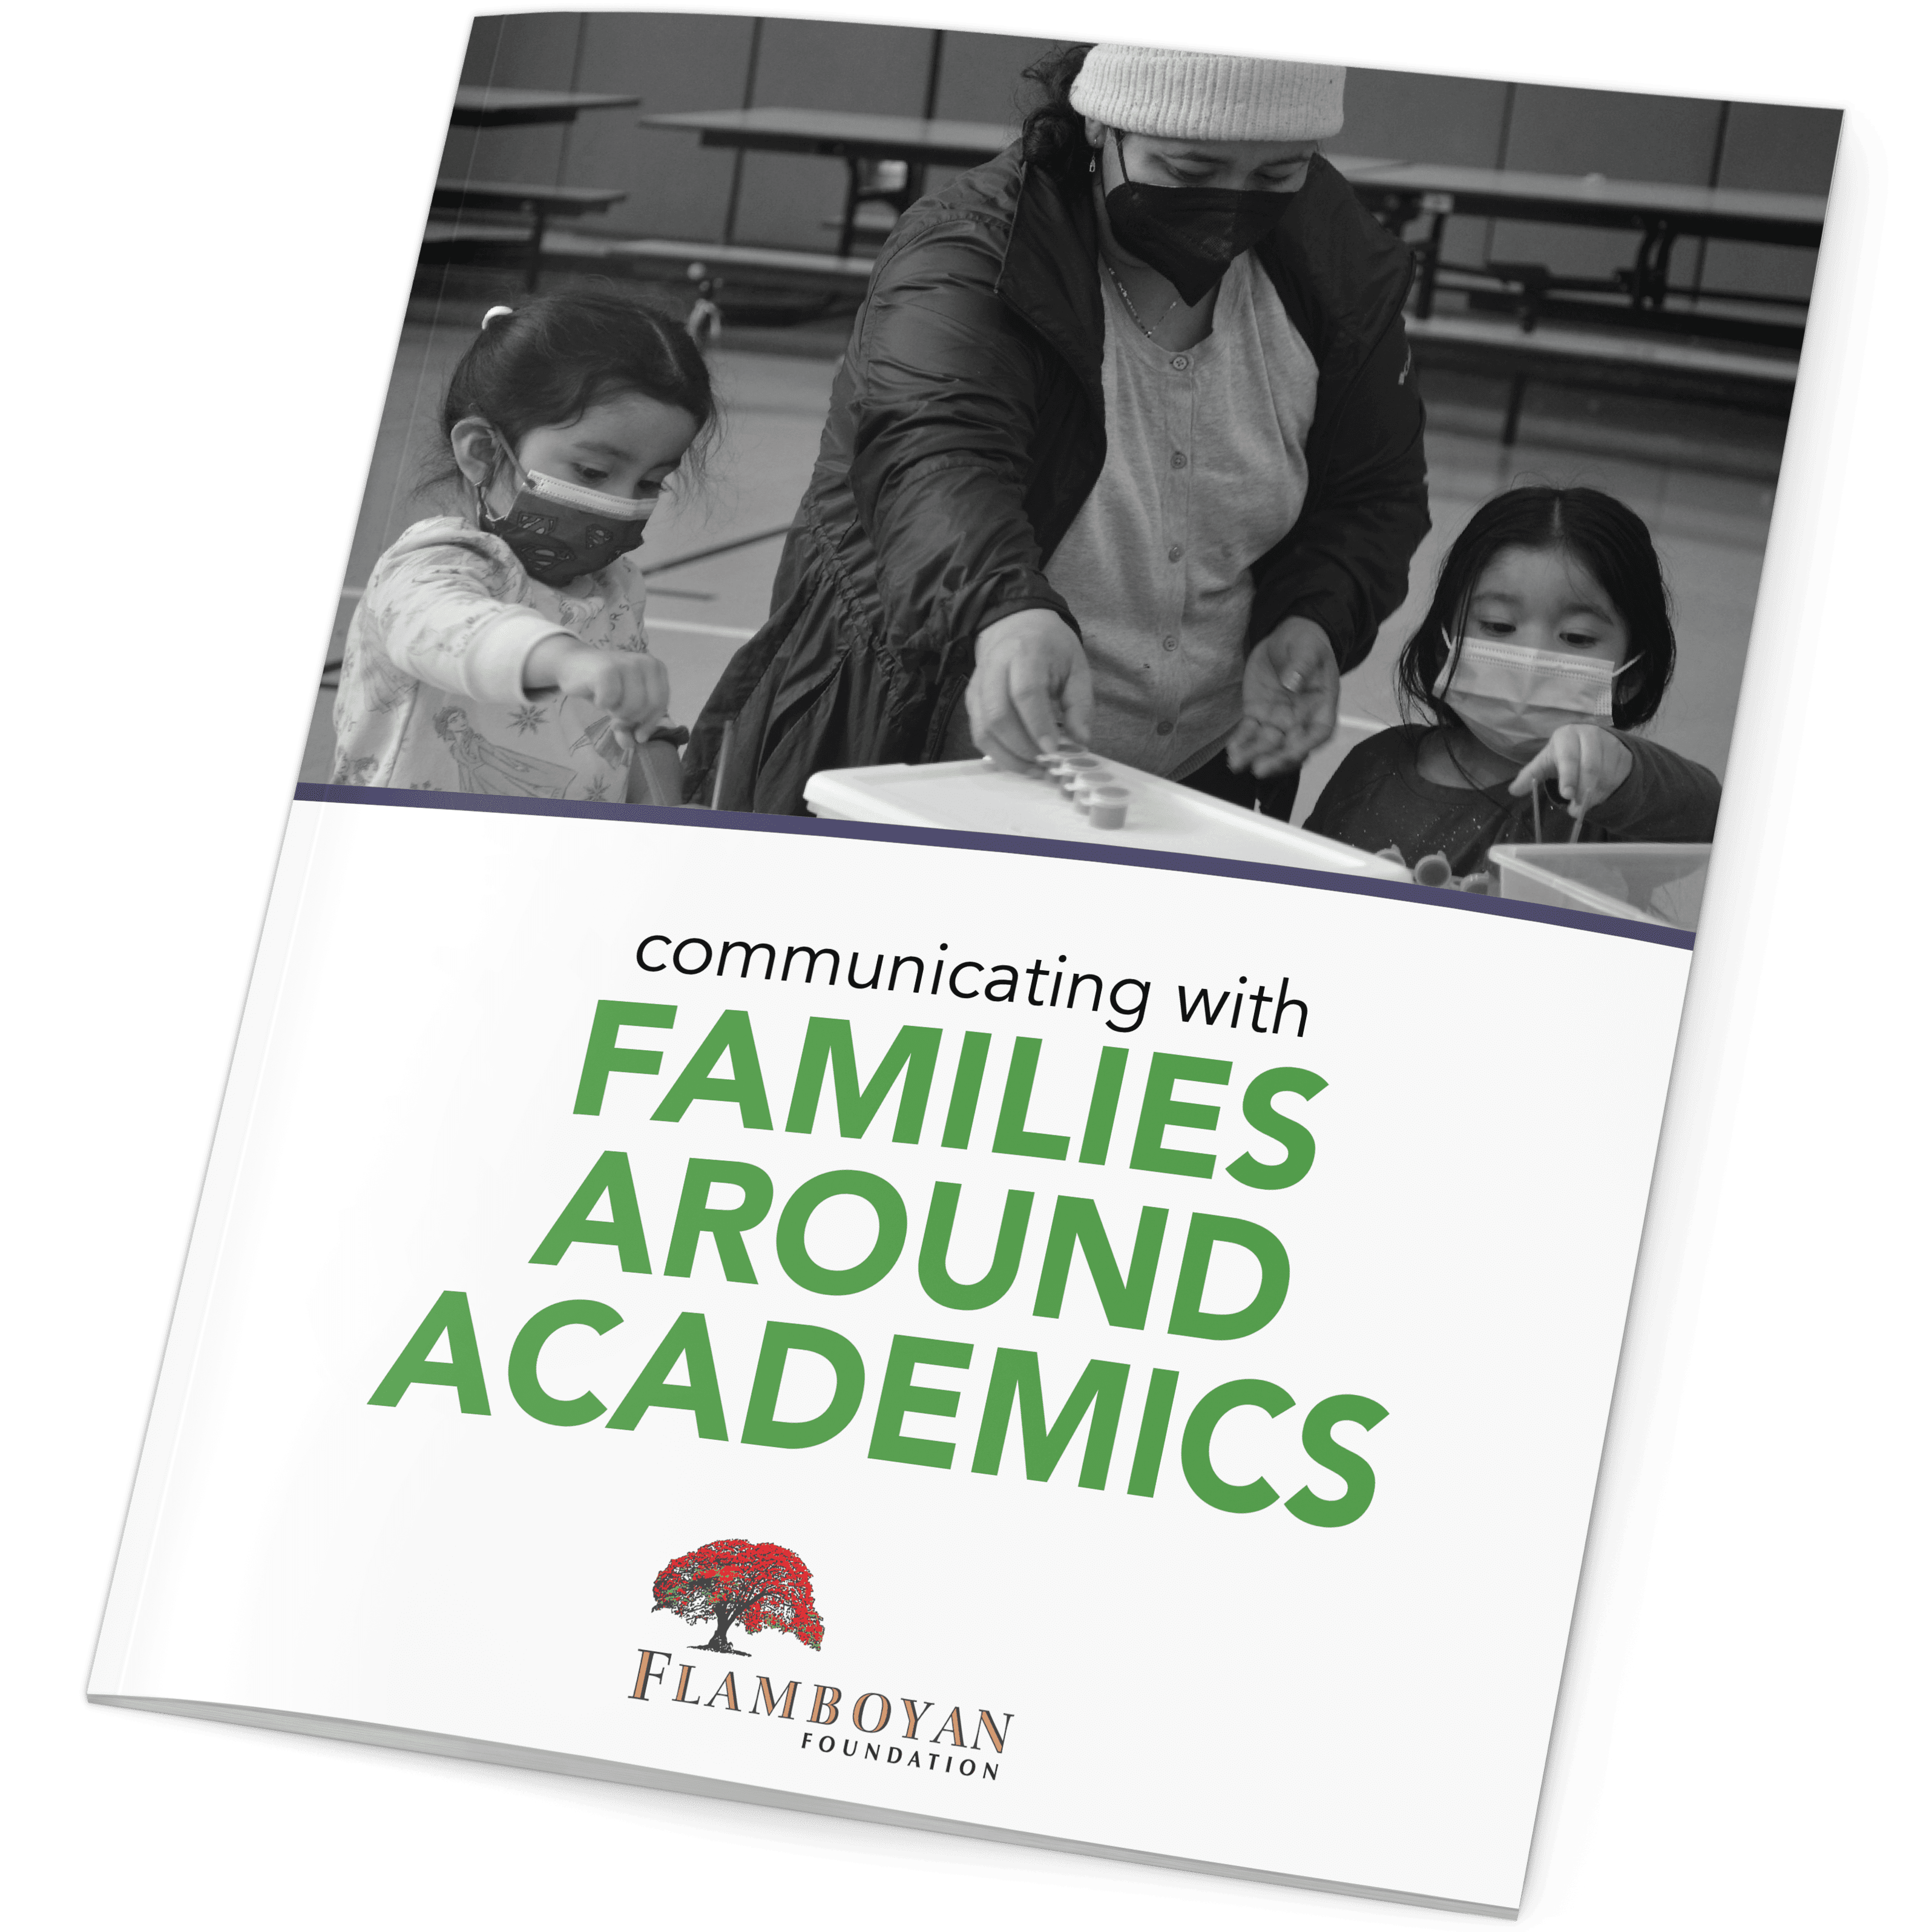 Communicating with Families Around Academics by Flamboyan Foundation